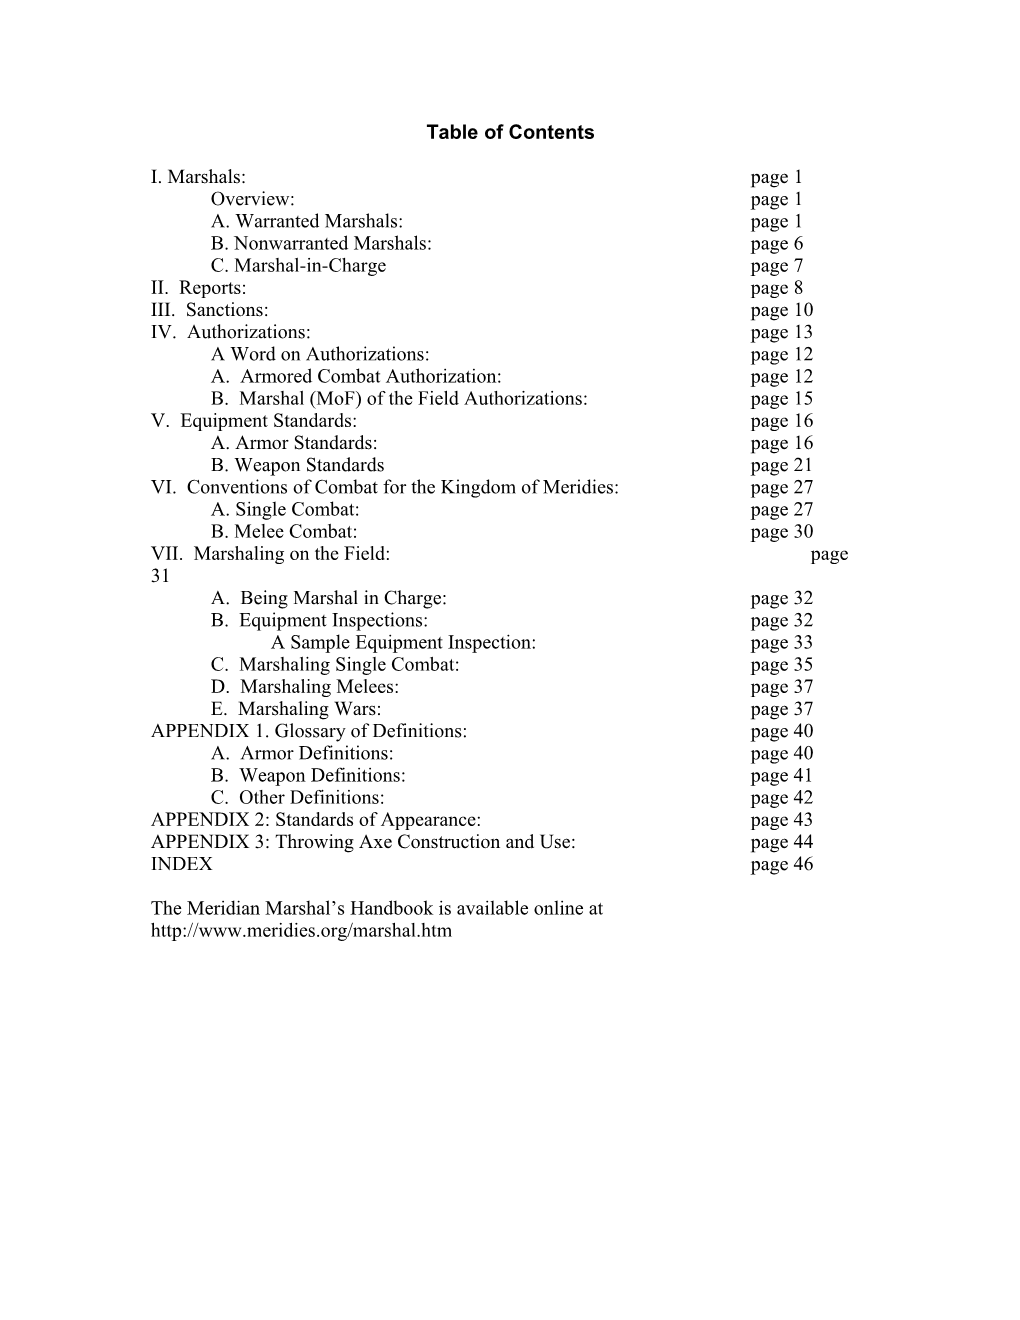 Table of Contents s62